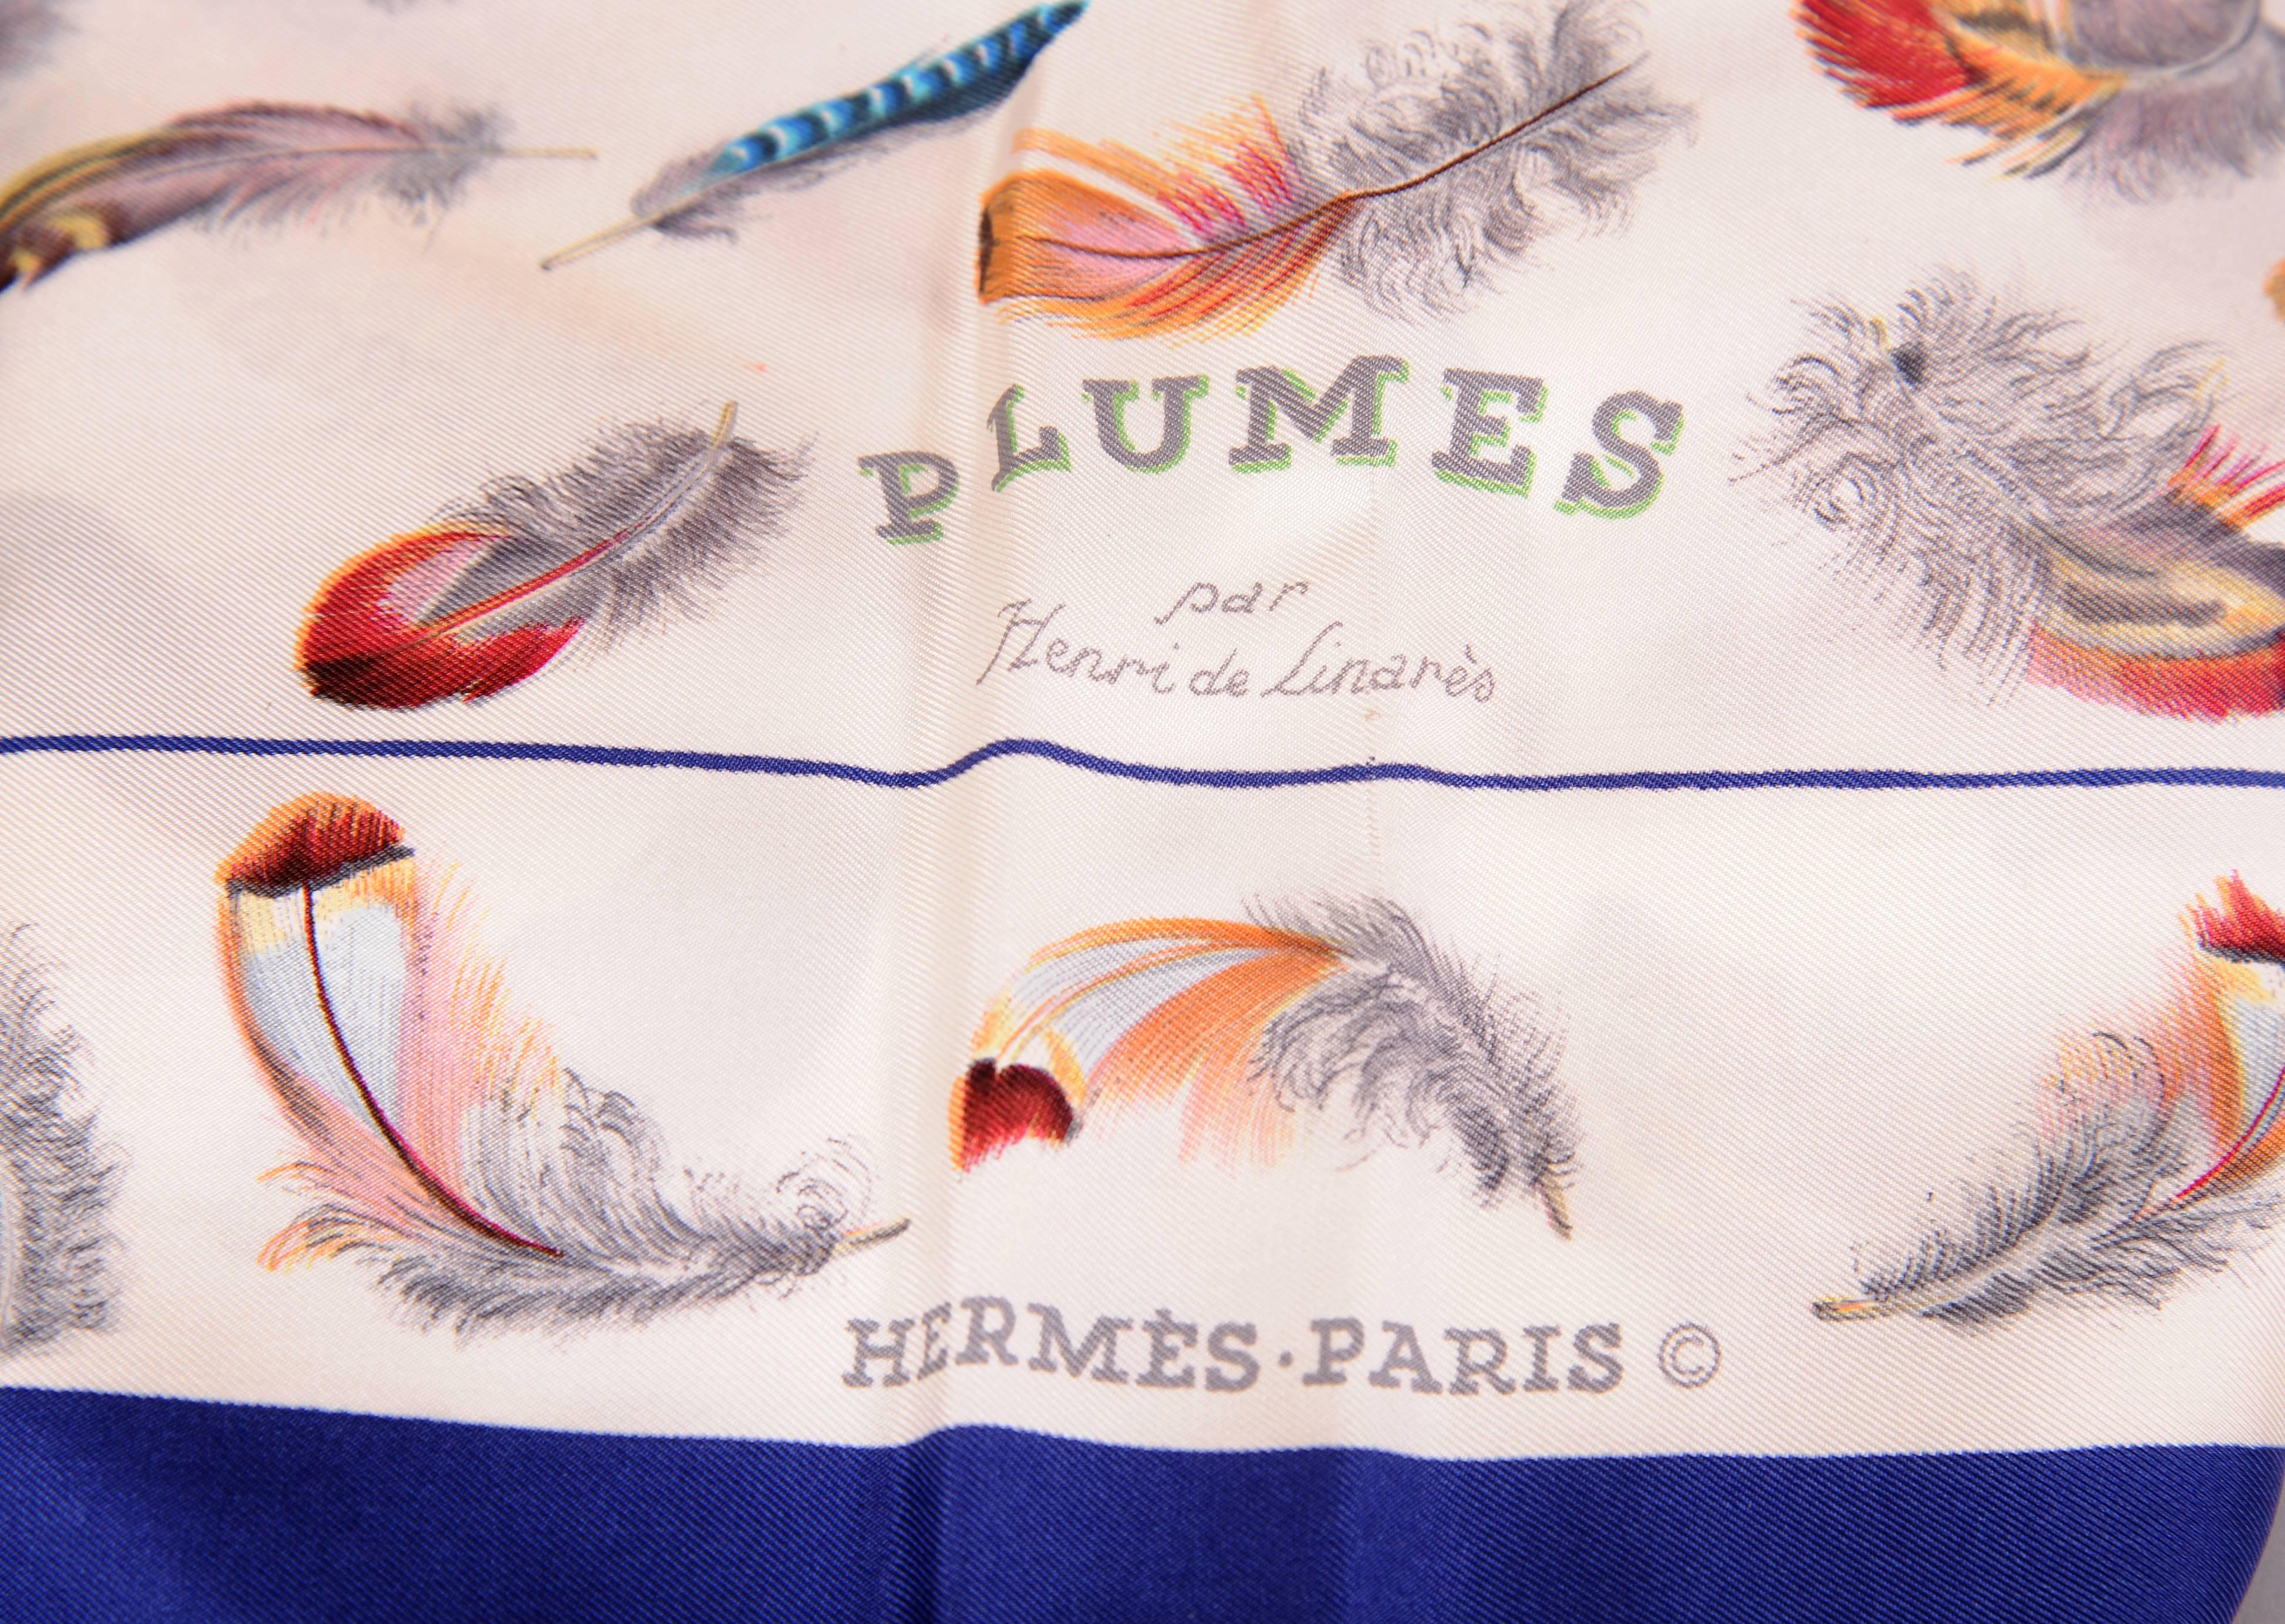 Colorful feathers float on a white silk background on this scarf designed by Henri de Linares. There is a narrow navy border, a border of similar feathers and then a wide navy outer border. The scarf is in excellent condition and it comes with the